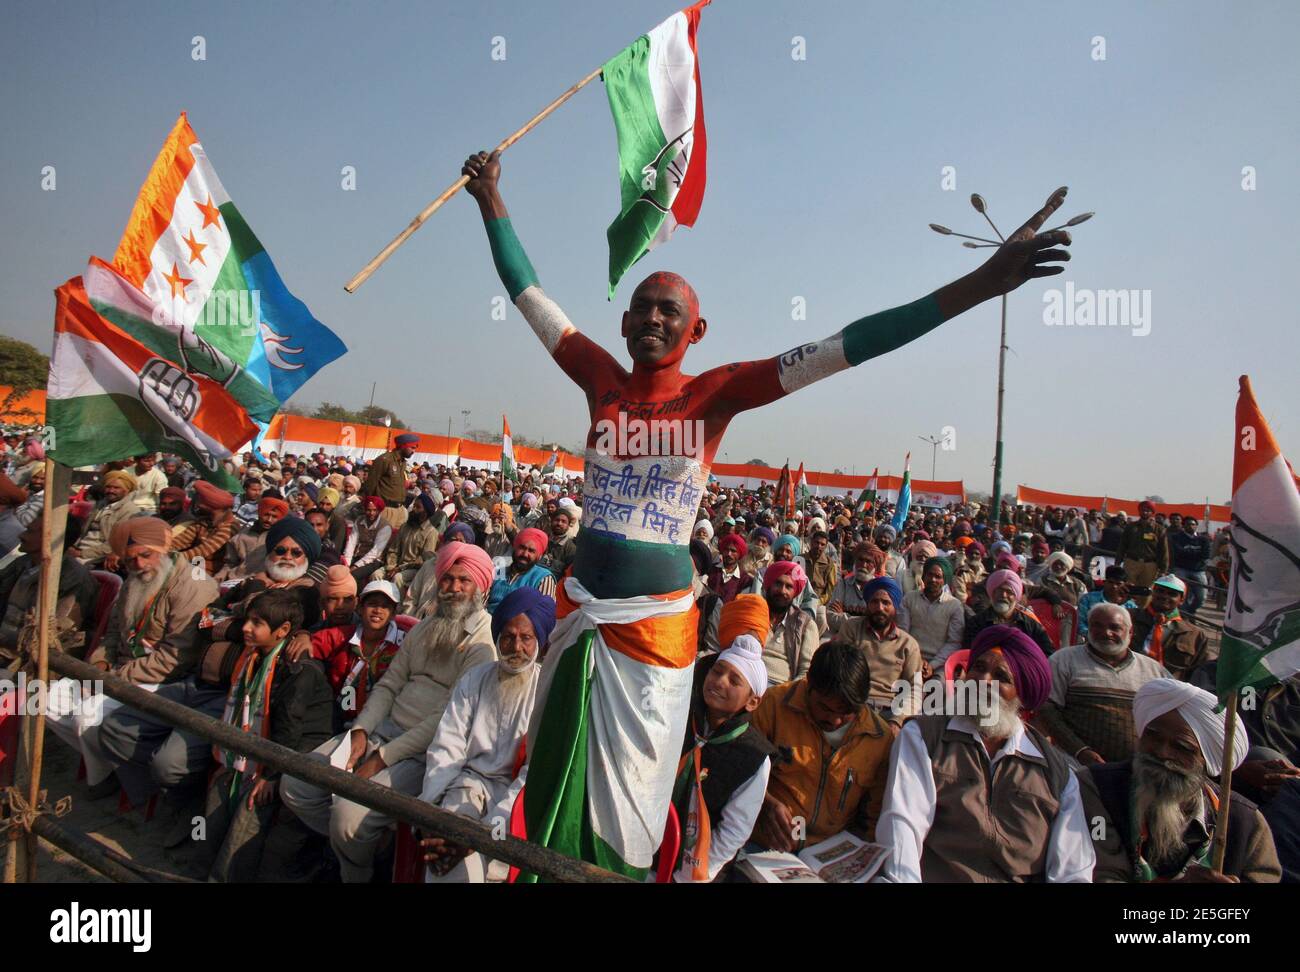 A supporter of India's ruling Congress party waves a flag during a campaign rally by Rahul Gandhi, a lawmaker and son of Congress party chief Sonia Gandhi, ahead of state assembly elections at Sirhind in the northern Indian state of Punjab January 27, 2012.  REUTERS/Ajay Verma (INDIA - Tags: ELECTIONS POLITICS TPX IMAGES OF THE DAY) Stock Photo